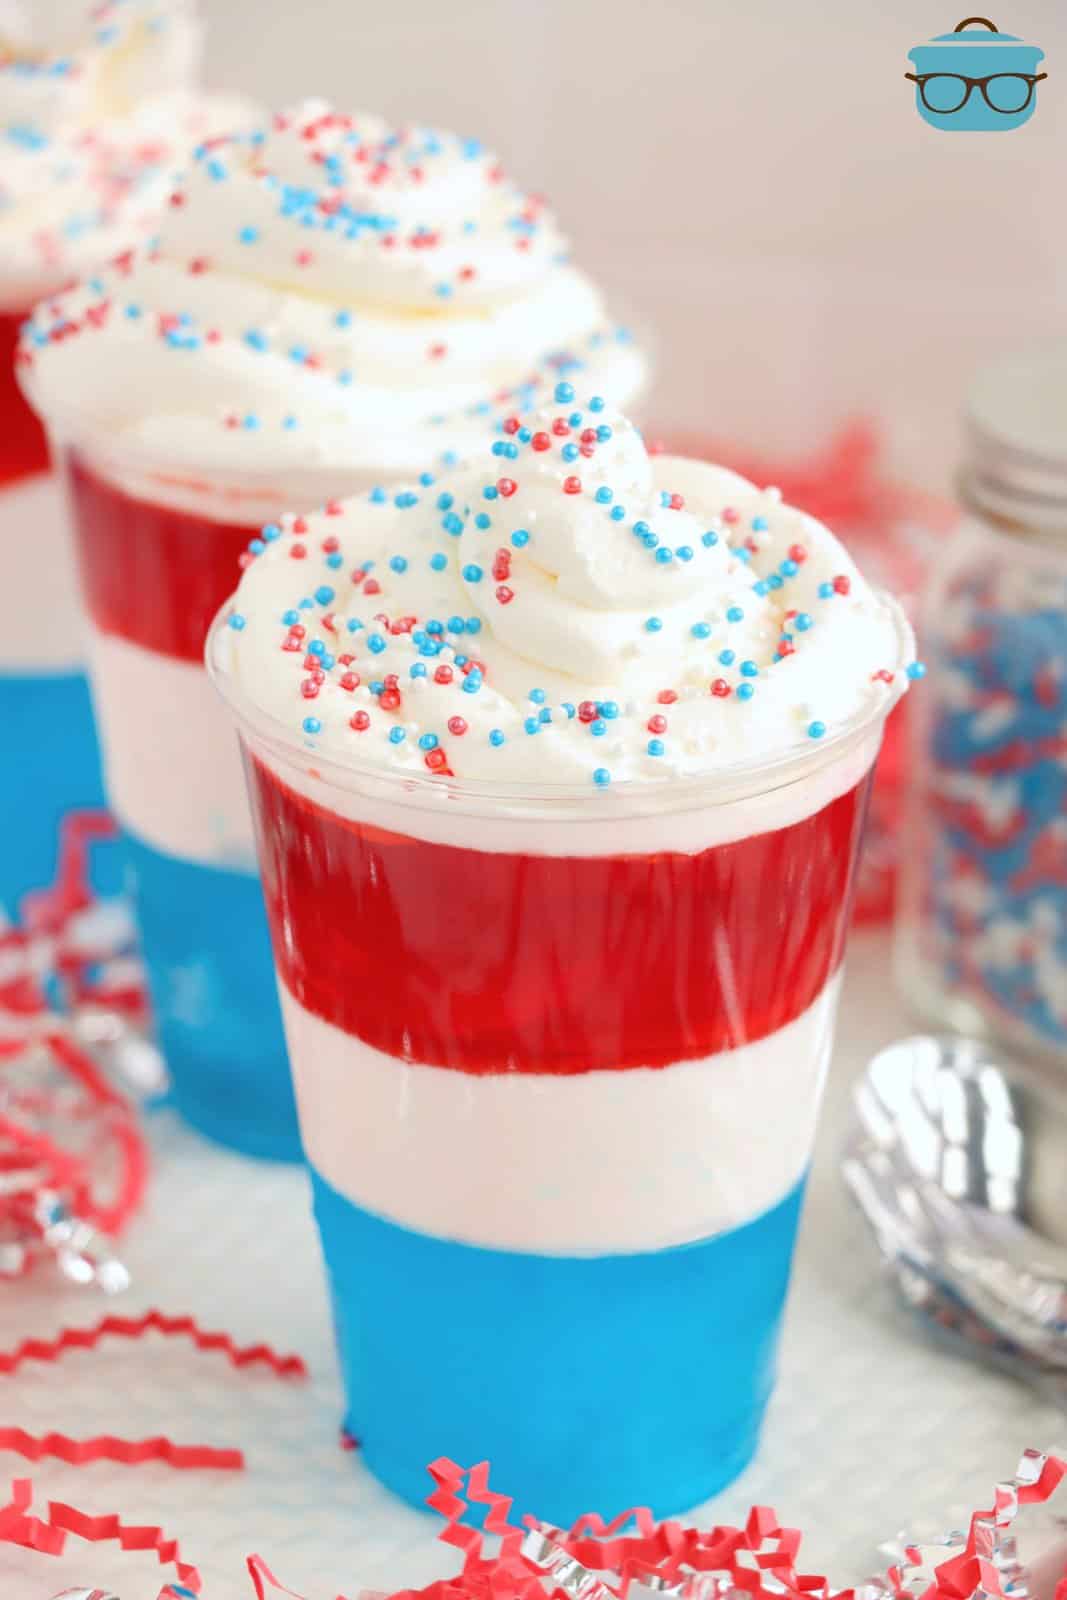 Layered Jello cups that are red, white, and blue.